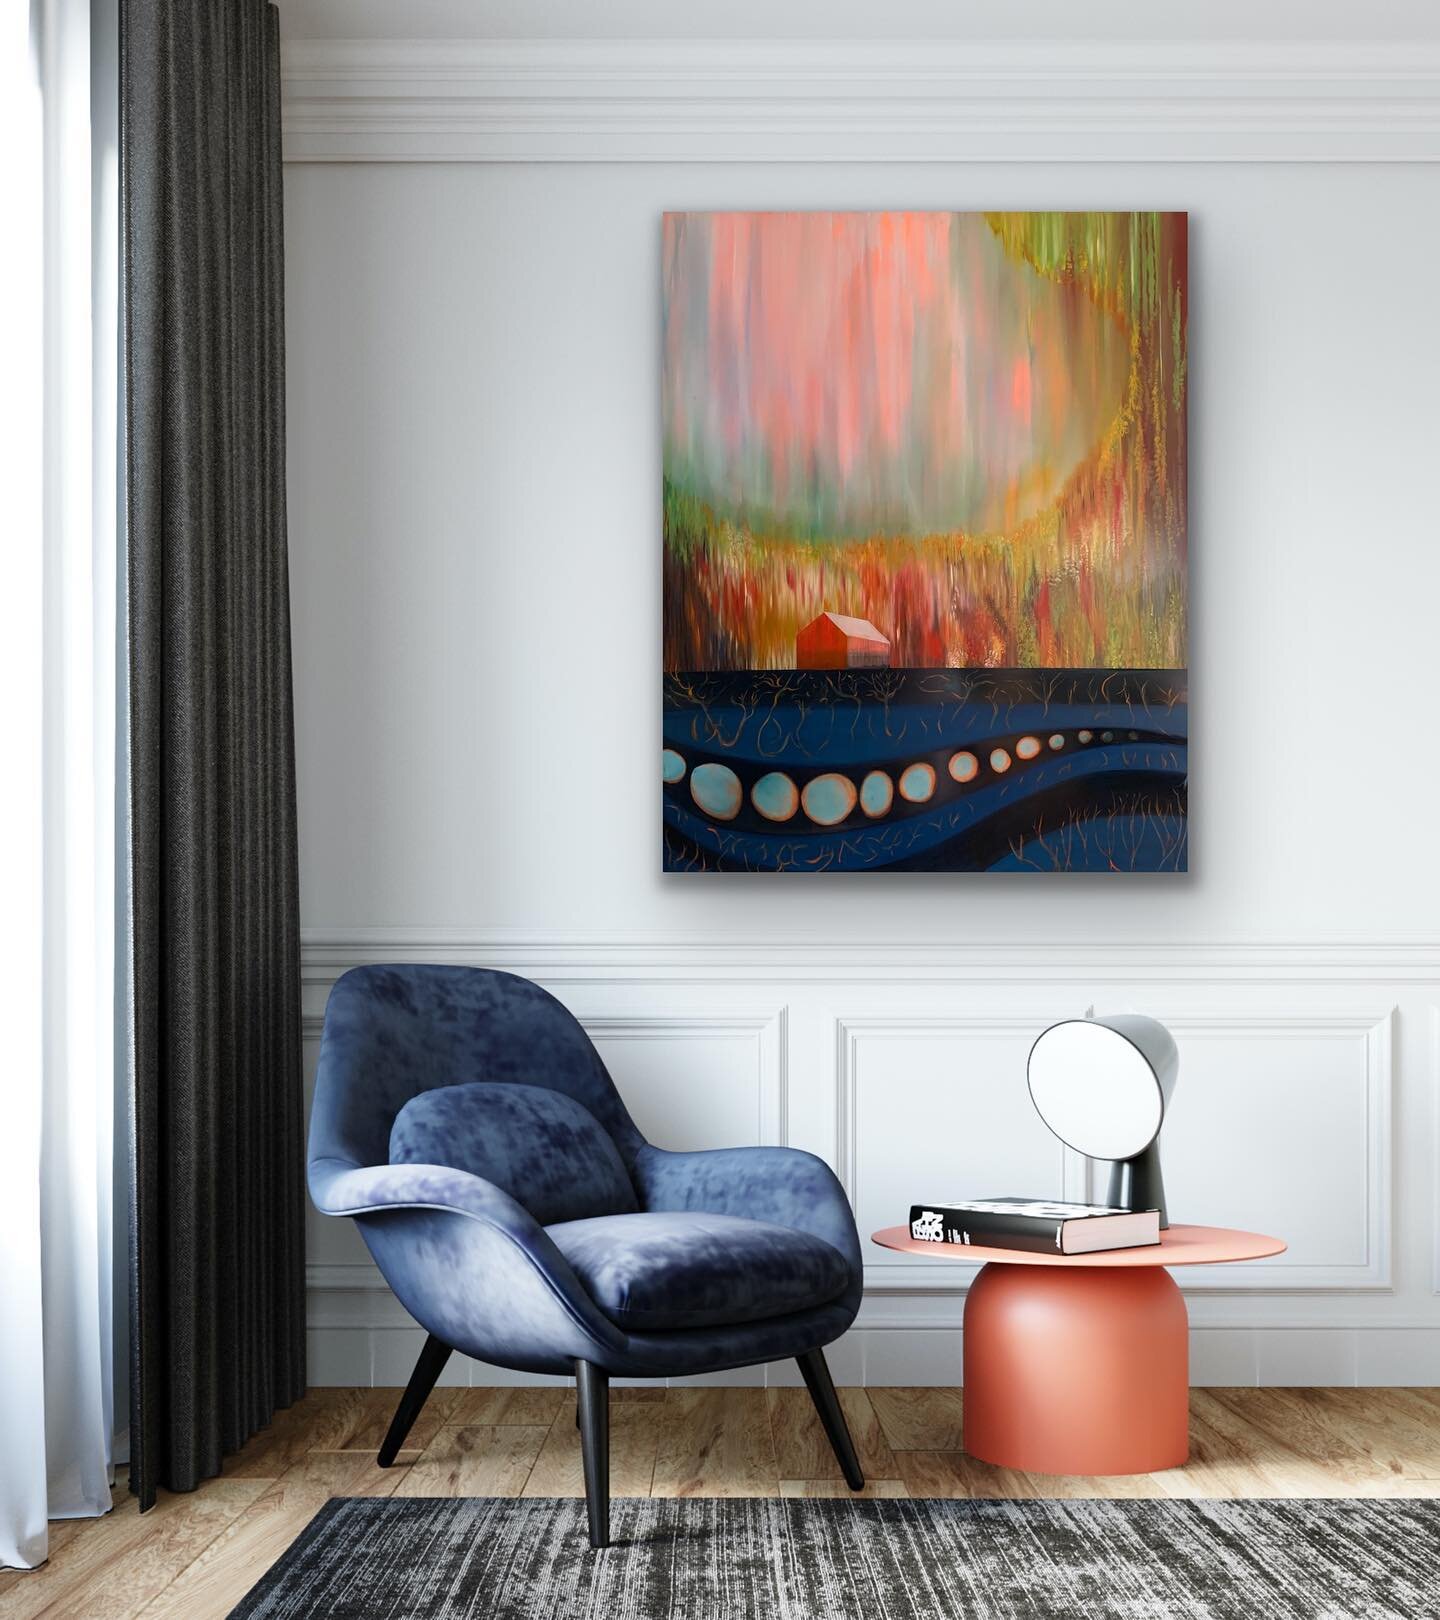 &ldquo;Home&rdquo;
Oil on aluminum 
125 x 100 cm
2023

Thank you @artrooms.
Always lovely to see how a painting would look in situ.

Come and see them yourself if you can @affordableartfairuk opening next Wednesday DM for free tickets! 

#affordablea